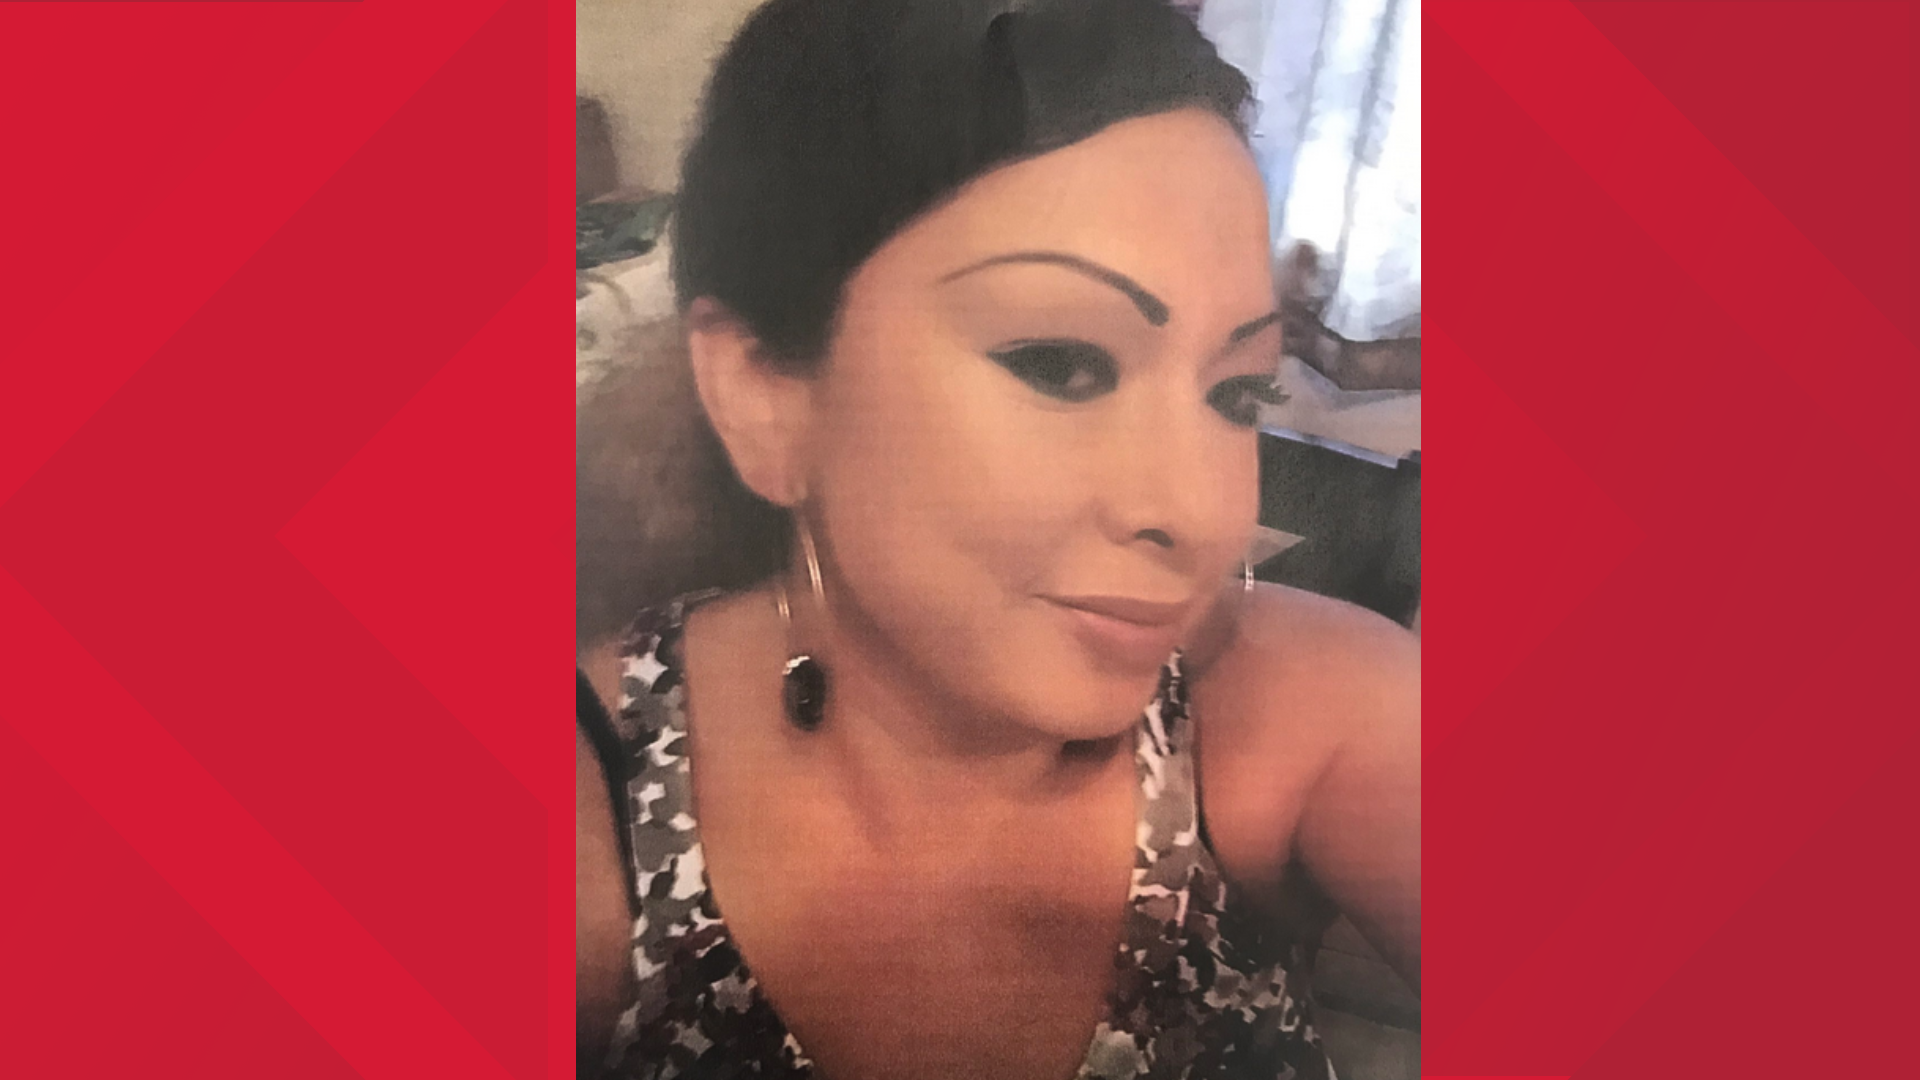 Soledad Ortiz's body was found in a ditch on Old Lexington Road near Lake Lucas Bridge in Asheboro after she was reported missing.